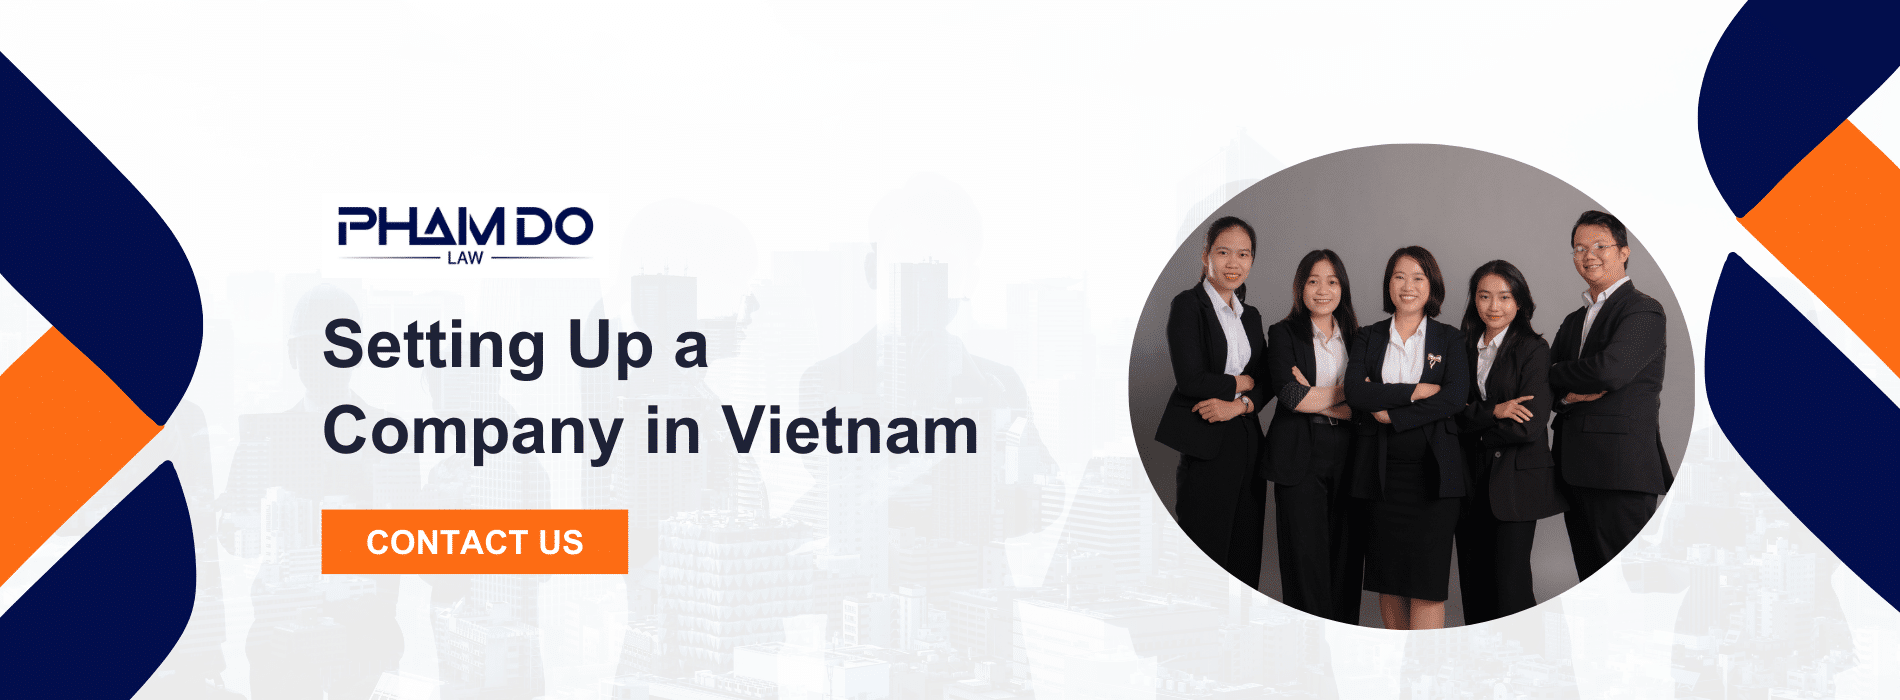 pham-do-law-setting-up-a-company-in-vietnam